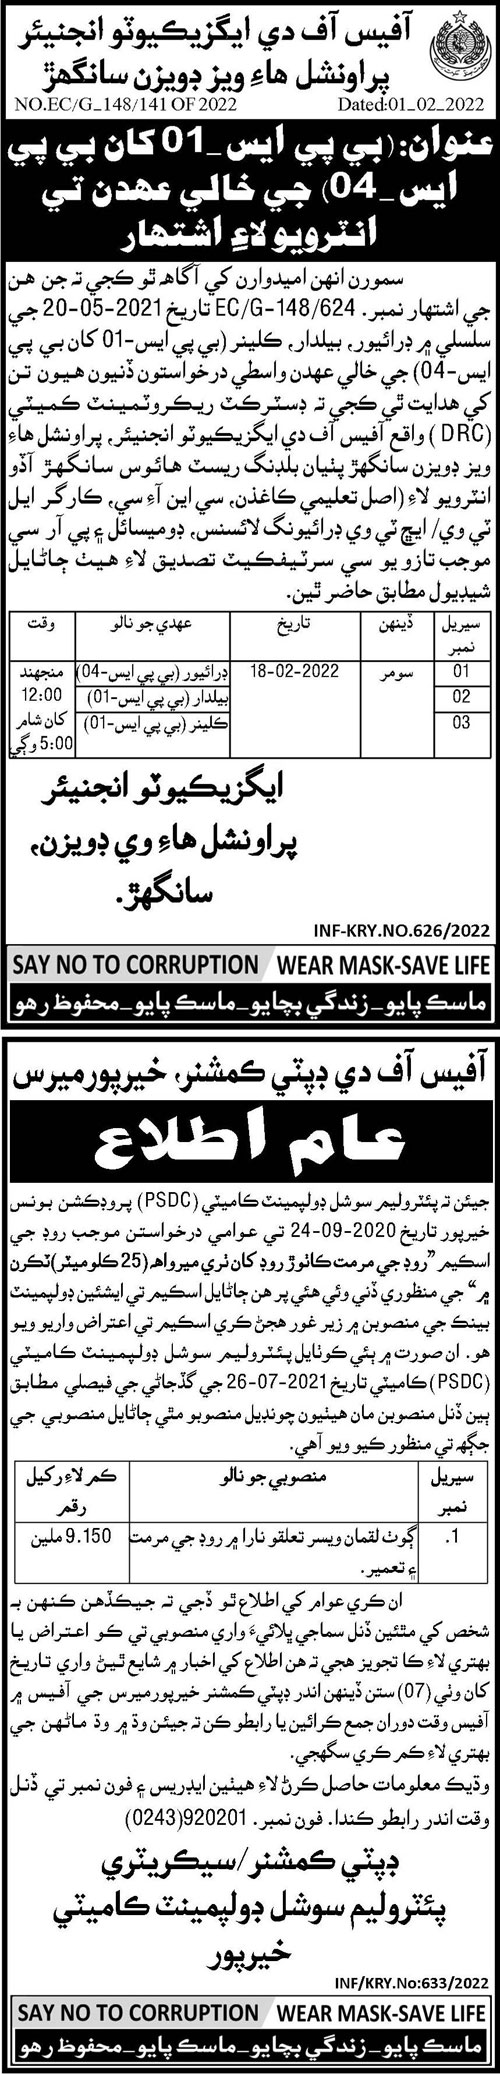 Interviews for jobs at Provincial Highway Division Sanghar